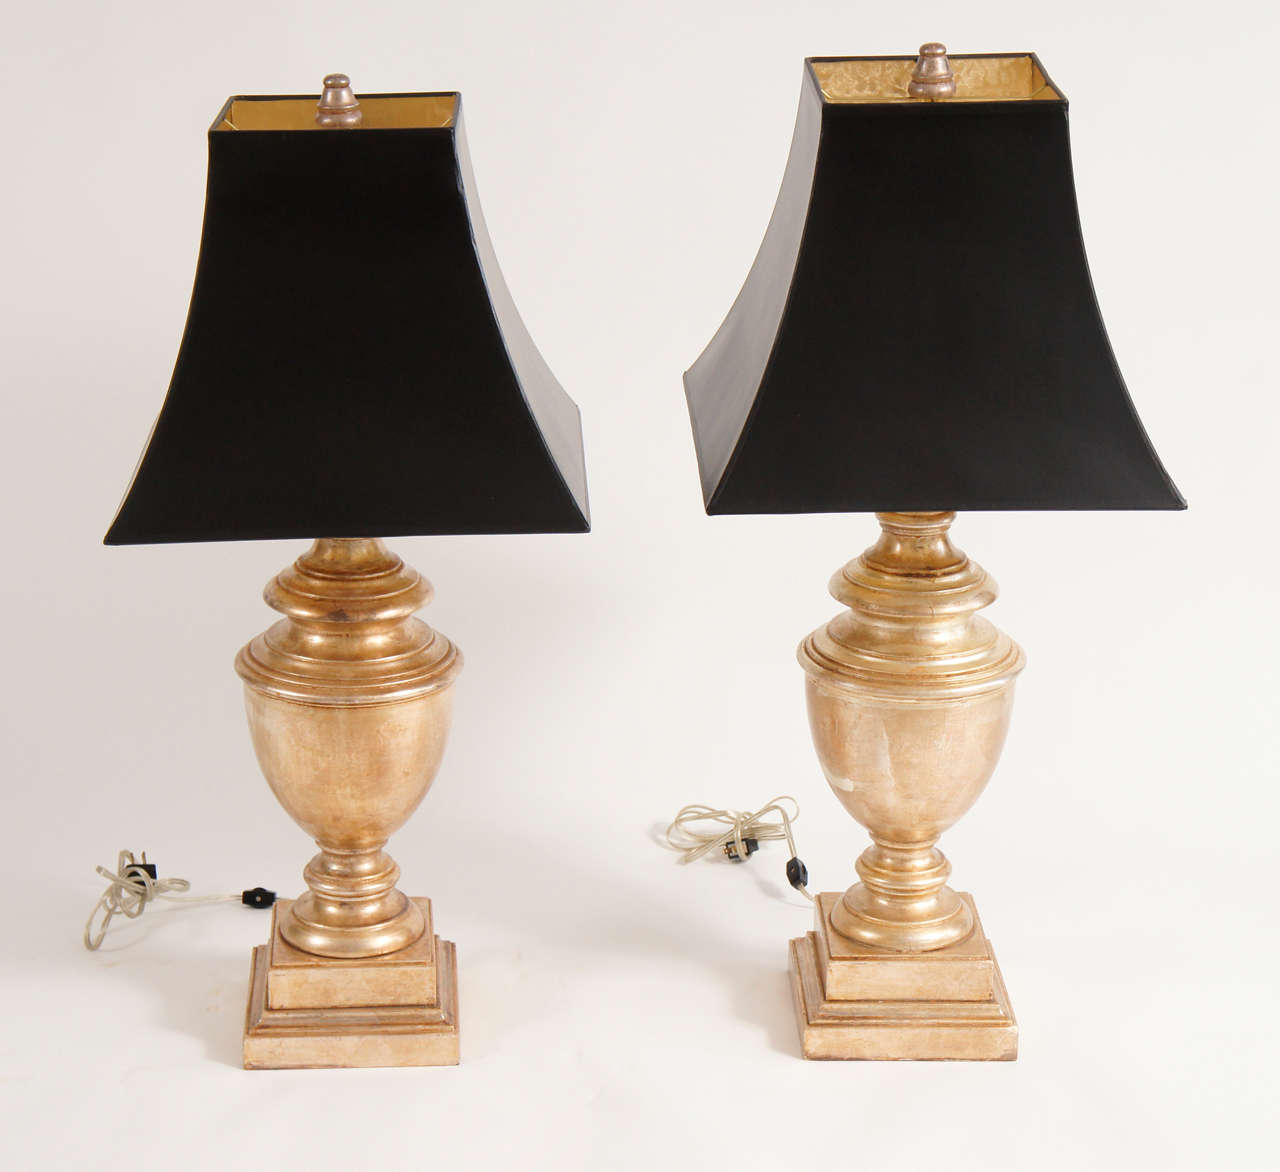 Two lamps by Baker, Knapp and Tubbs of gilded wood, one with a natural crack in the wooden body. We will restore upon request, should you prefer a less organic look. Each lamp accommodates two 60 watt bulbs and comes with fabulous, original finials.